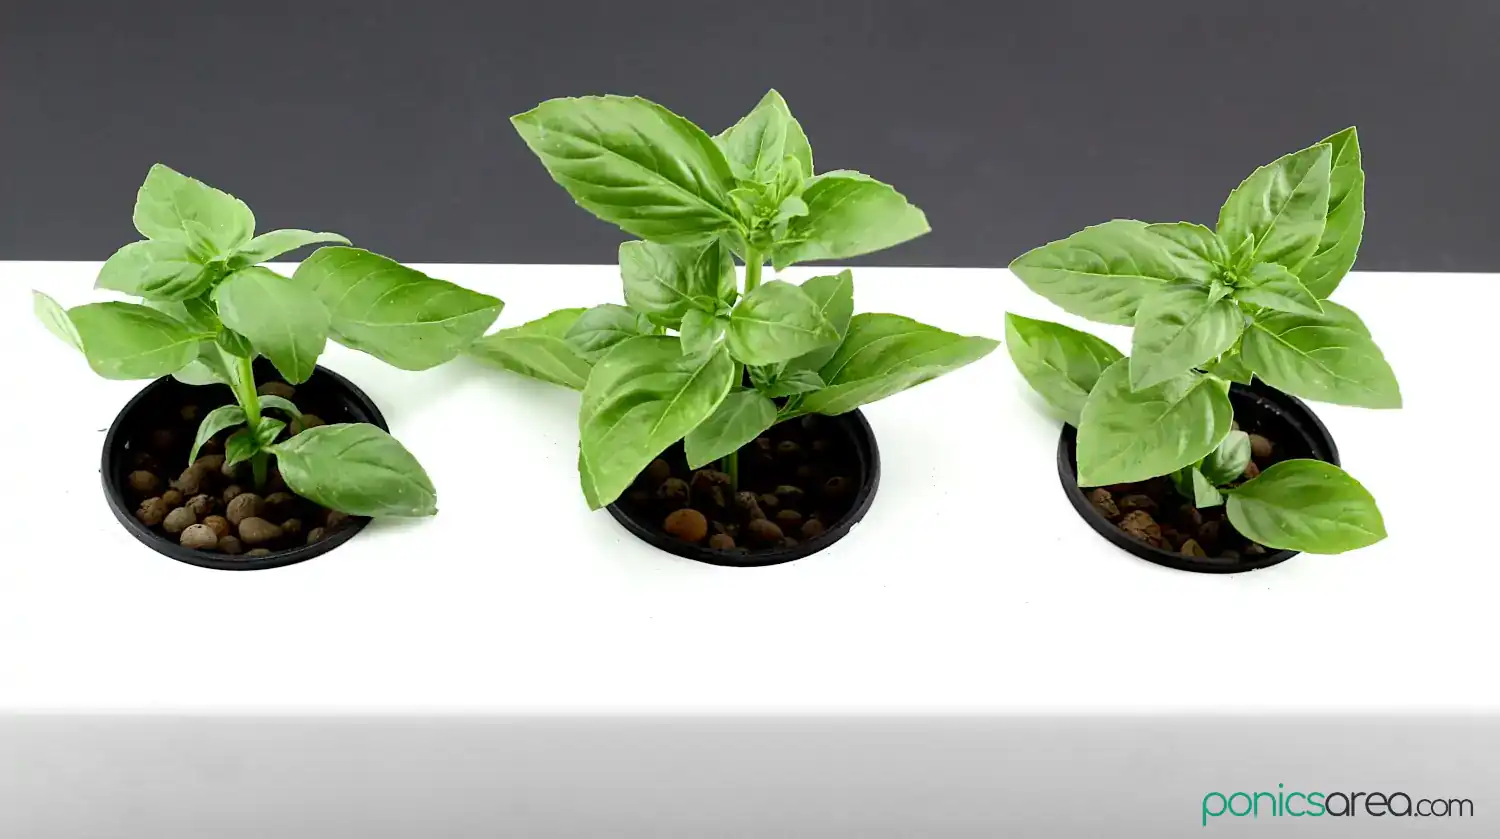 hydroponic system for growing basil